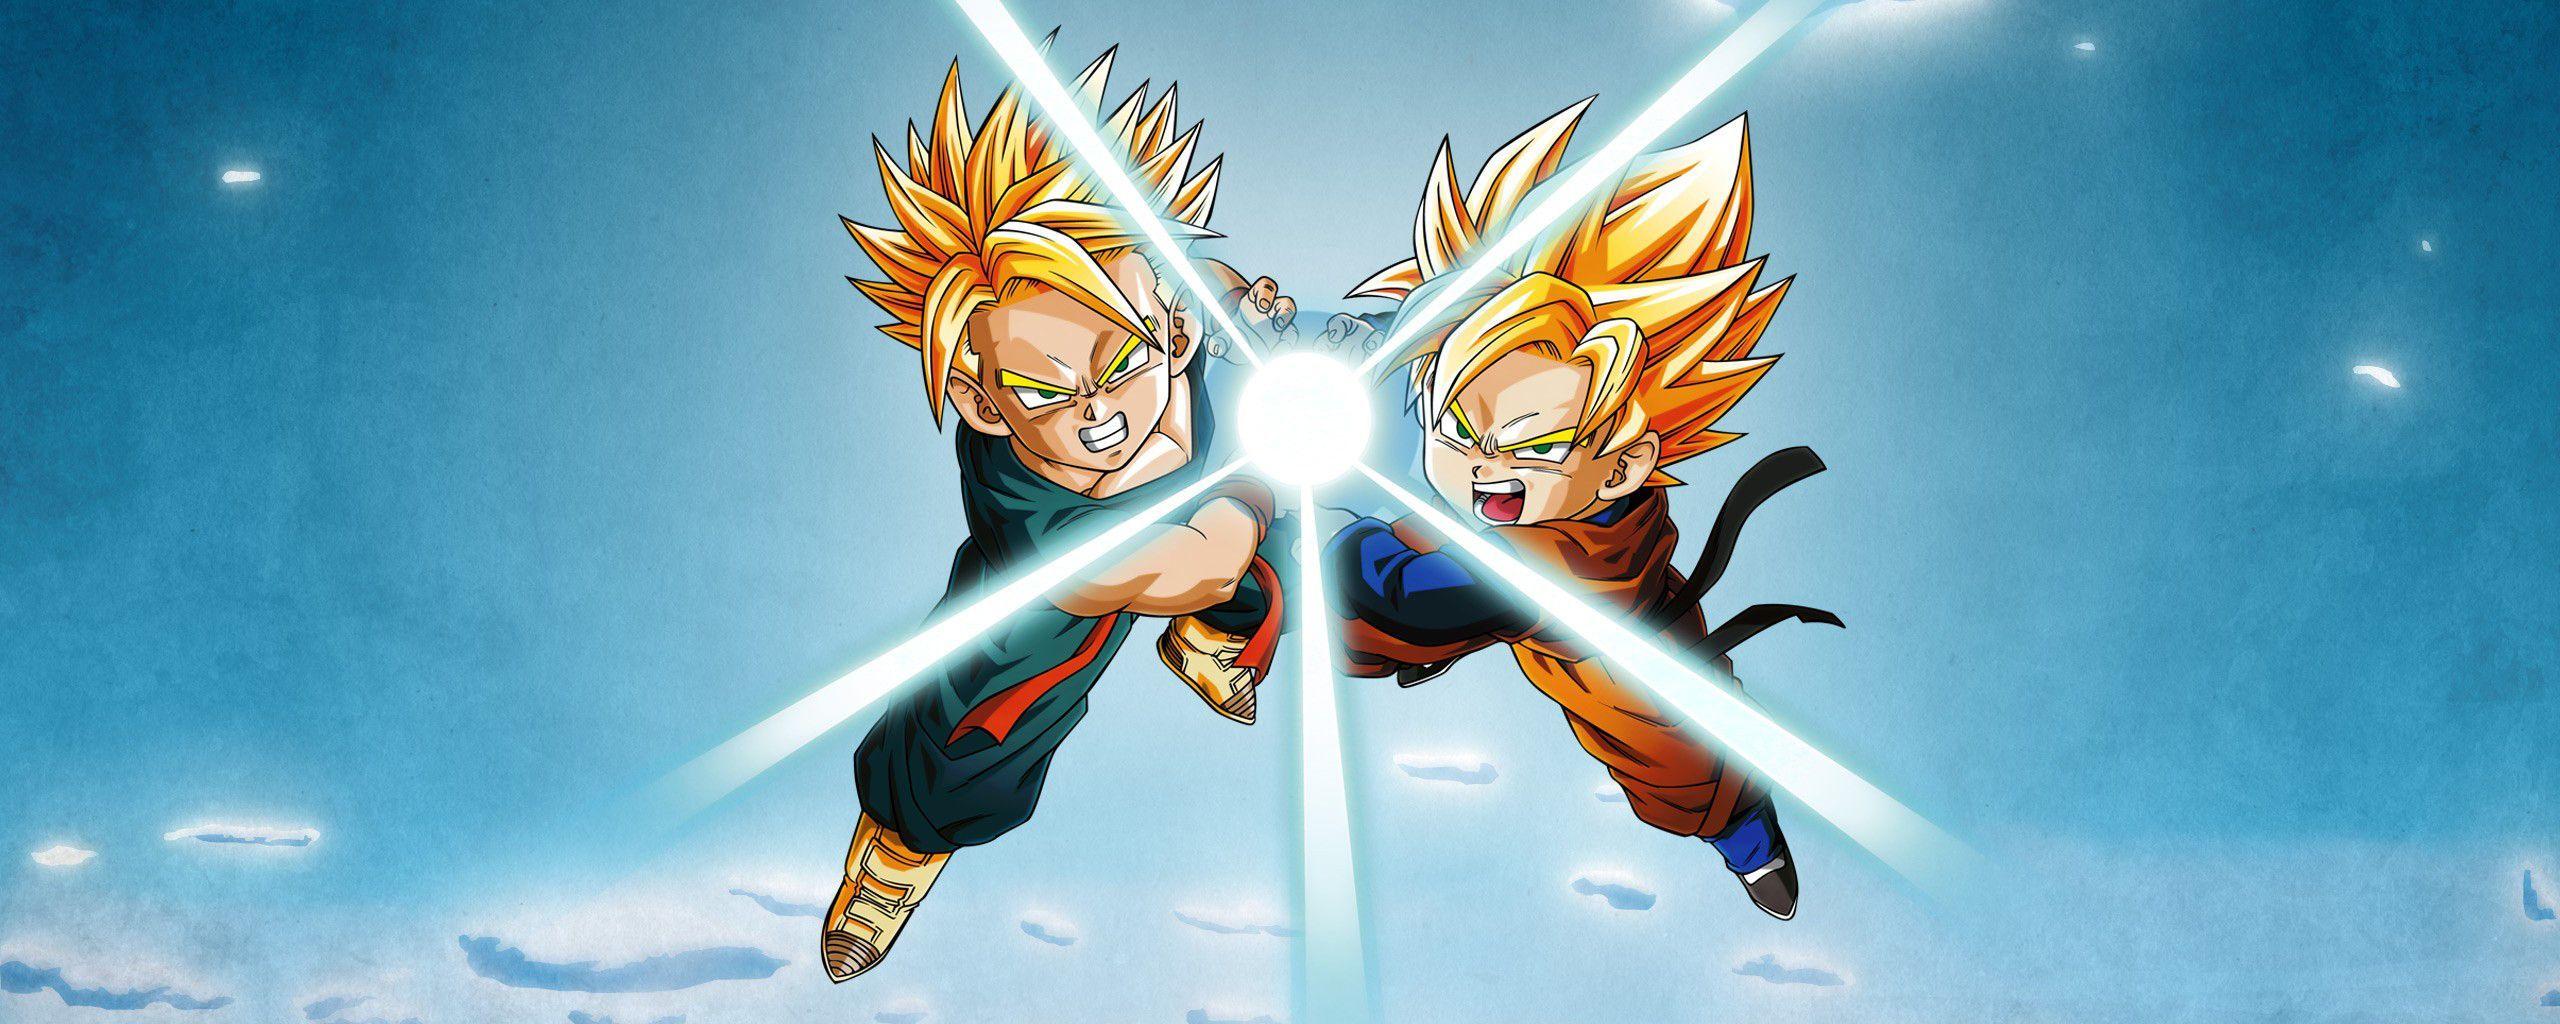 Dbz Dual Monitor Wallpapers Top Free Dbz Dual Monitor Backgrounds